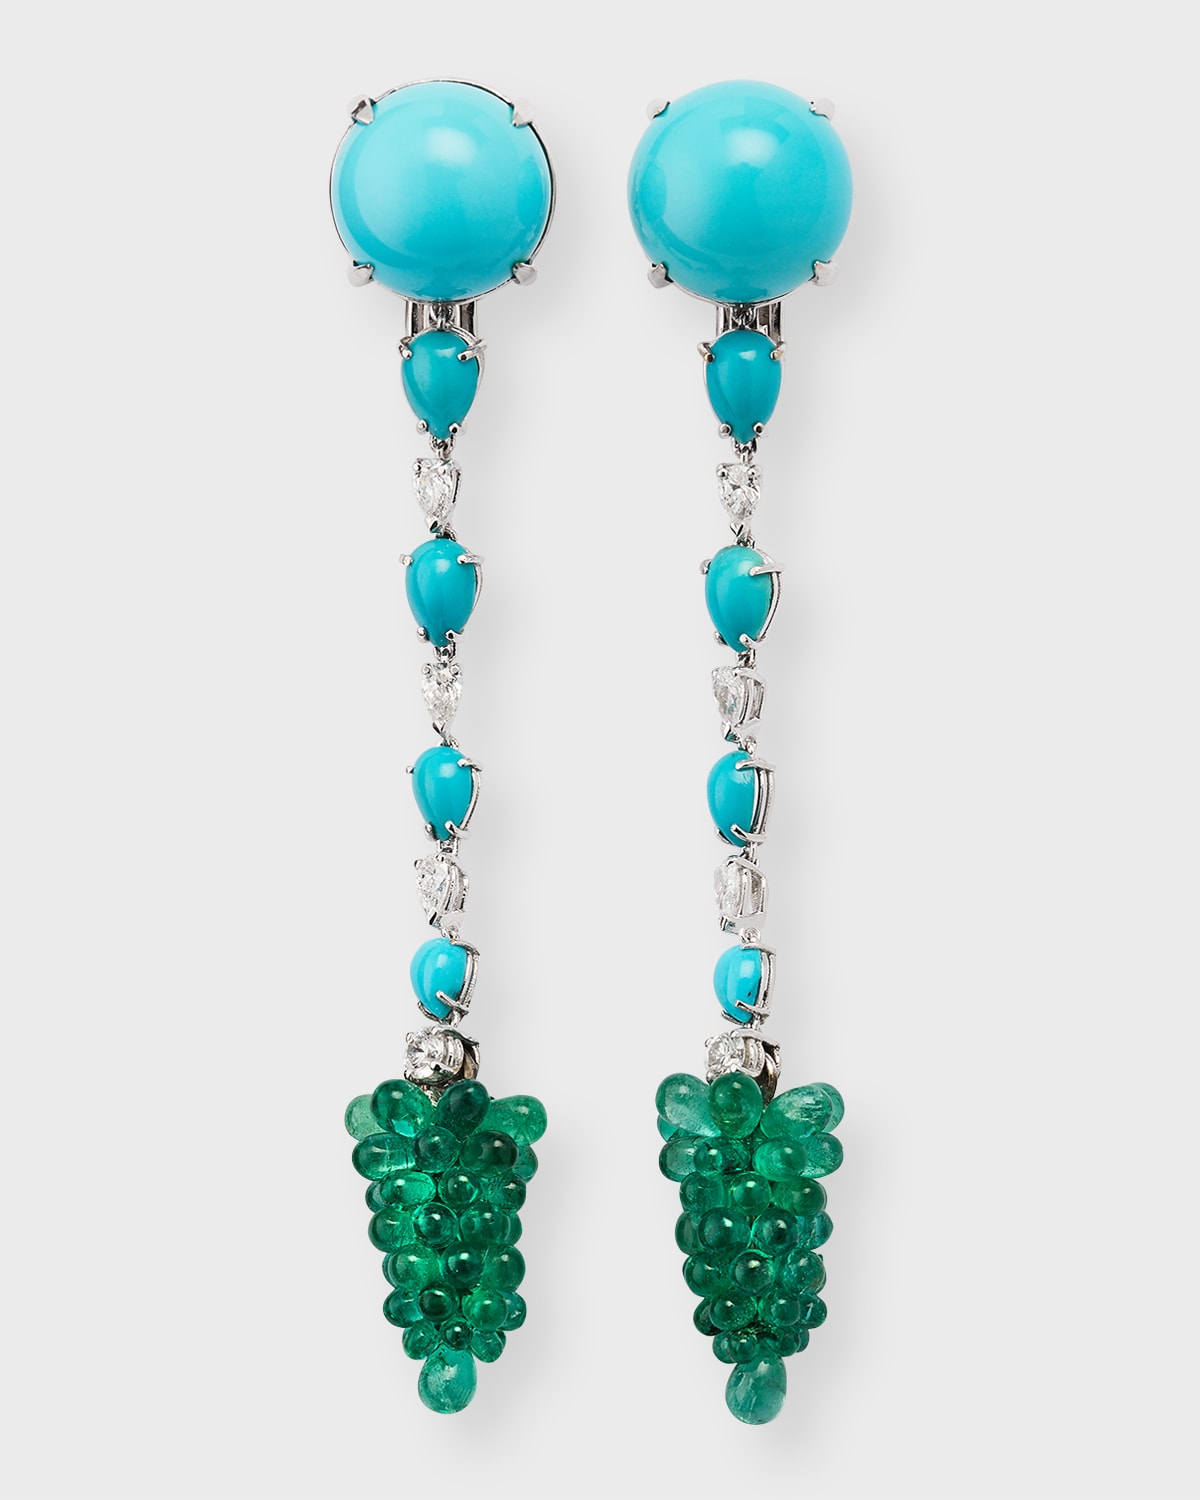 18K White Gold Spaghetti Earrings with Turquoise, Diamonds and Emeralds